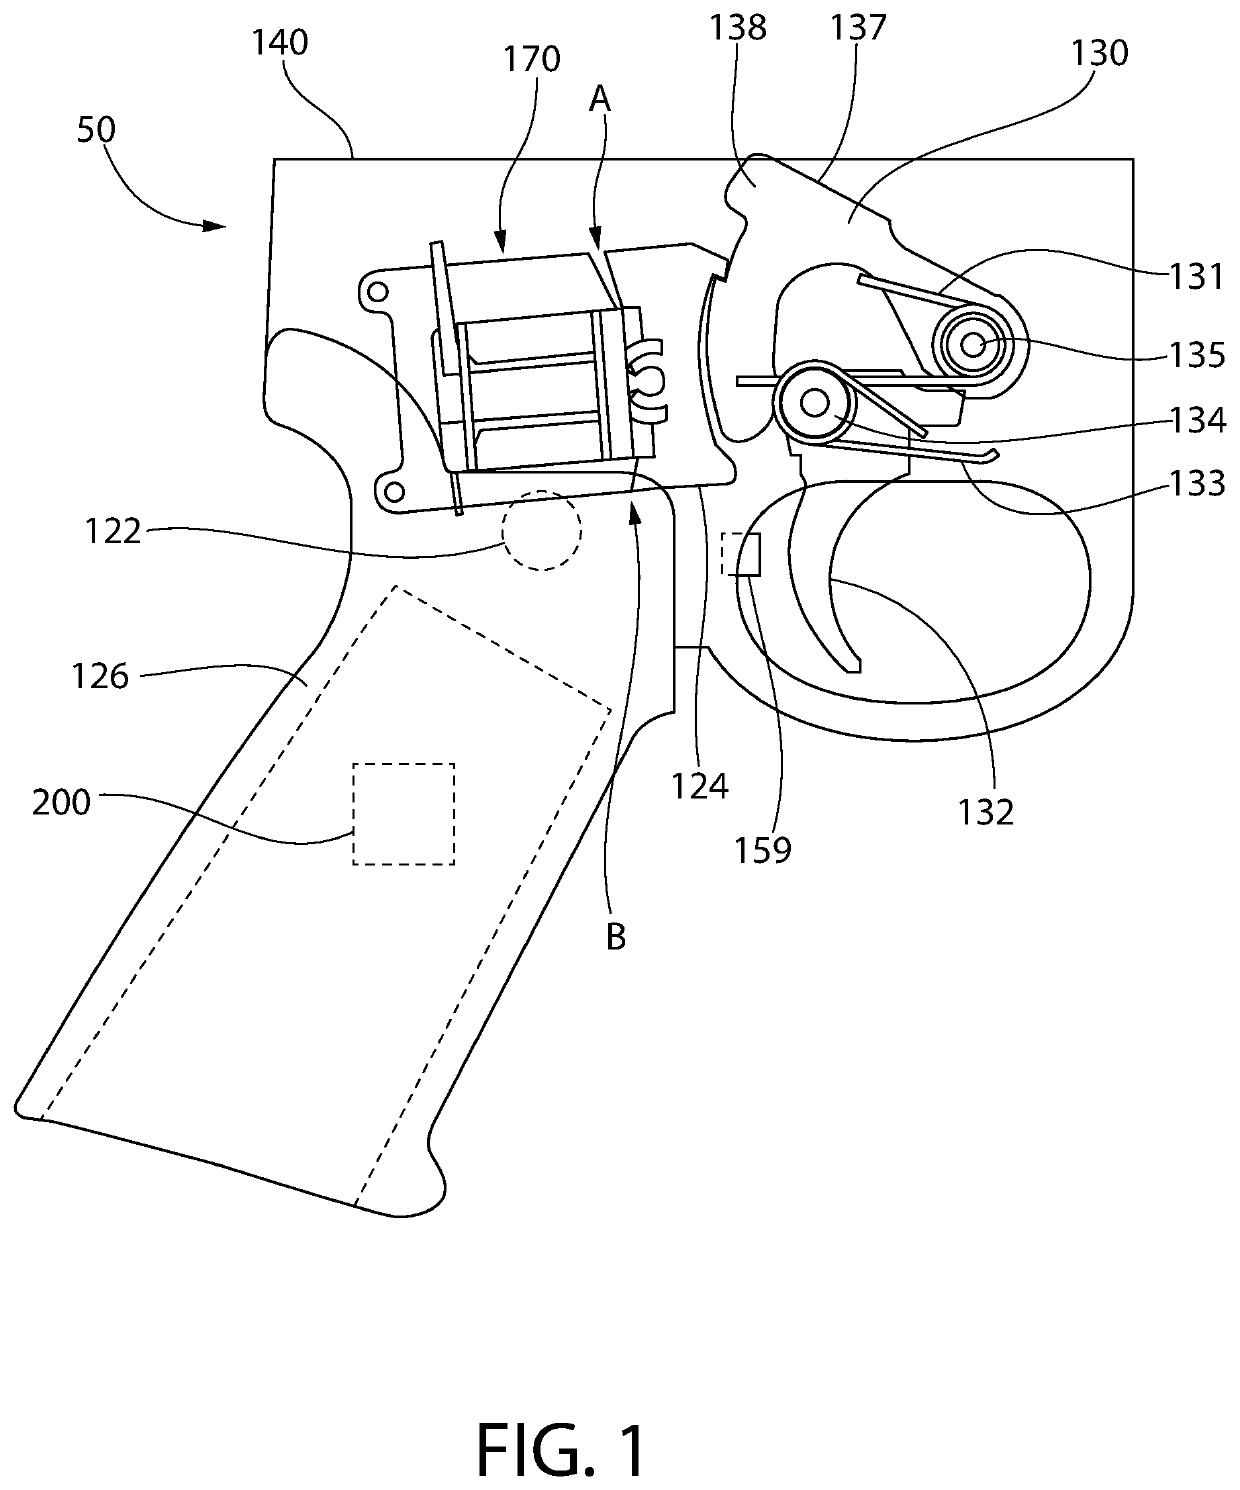 Fast action shock invariant magnetic actuator for firearms